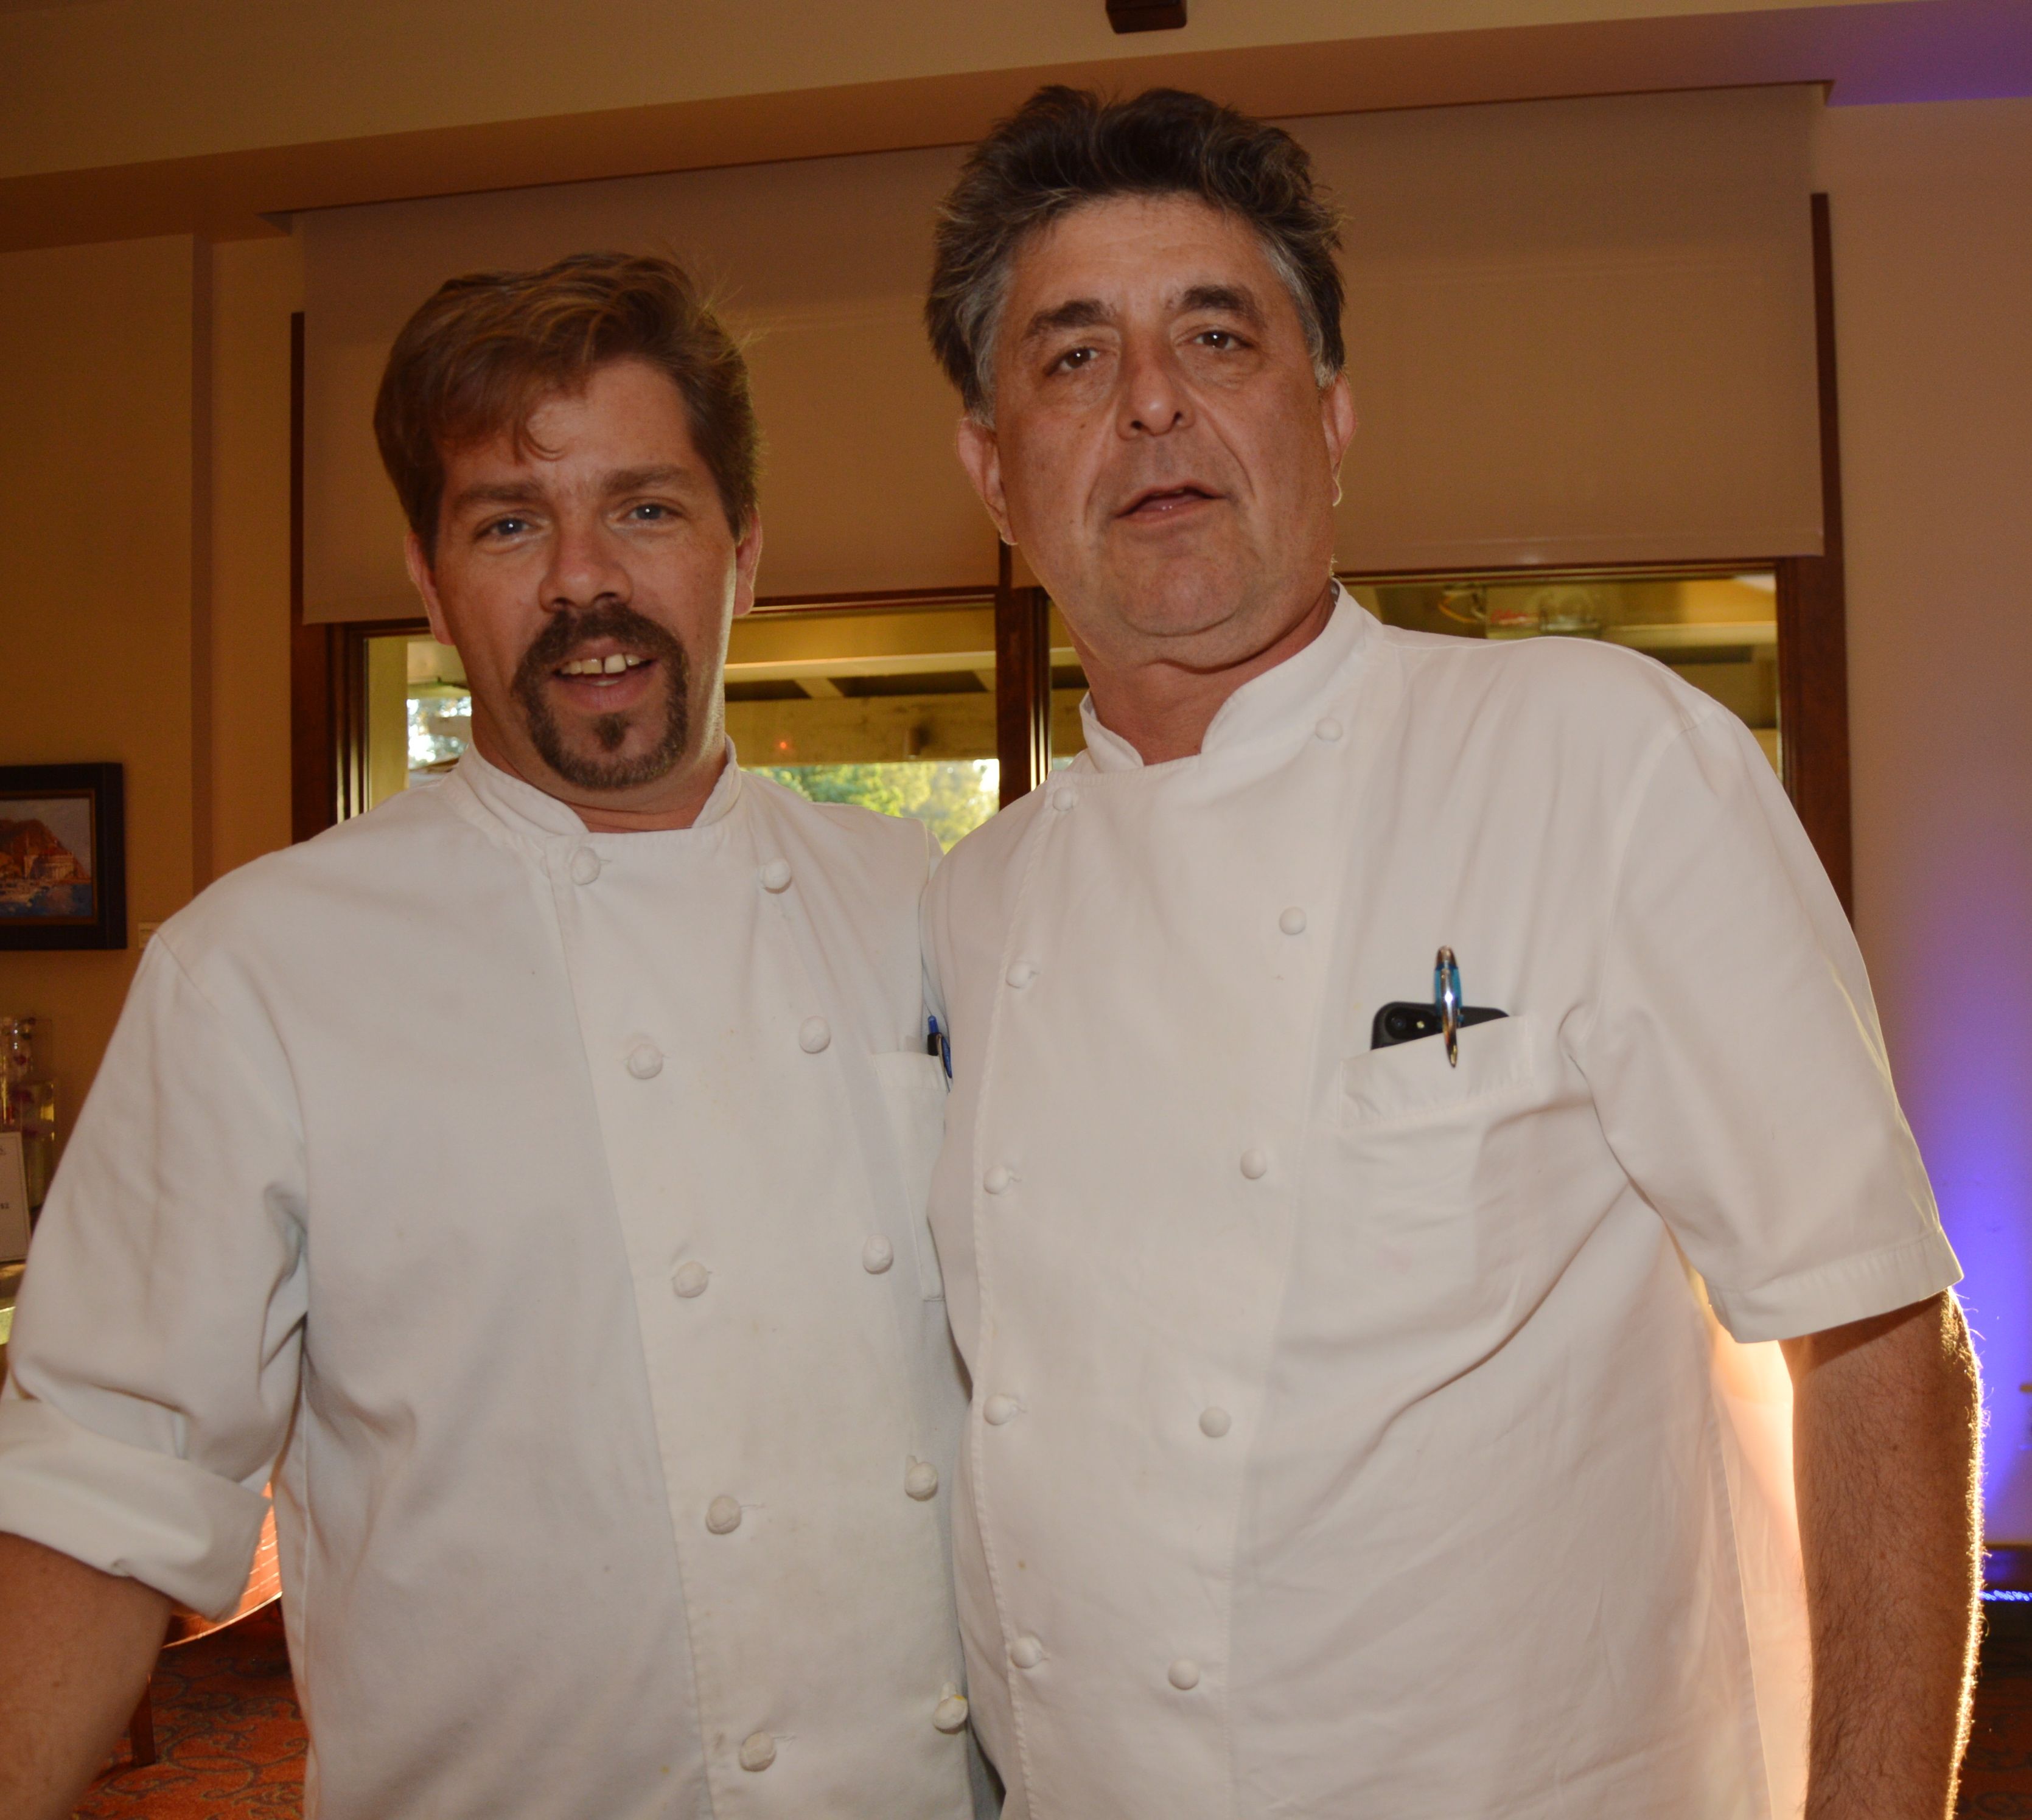 Bob Petersen, Chef of Mission Viejo Country Club and Azmin Ghahreman, Chef of Sapphire of Laguna Beach.